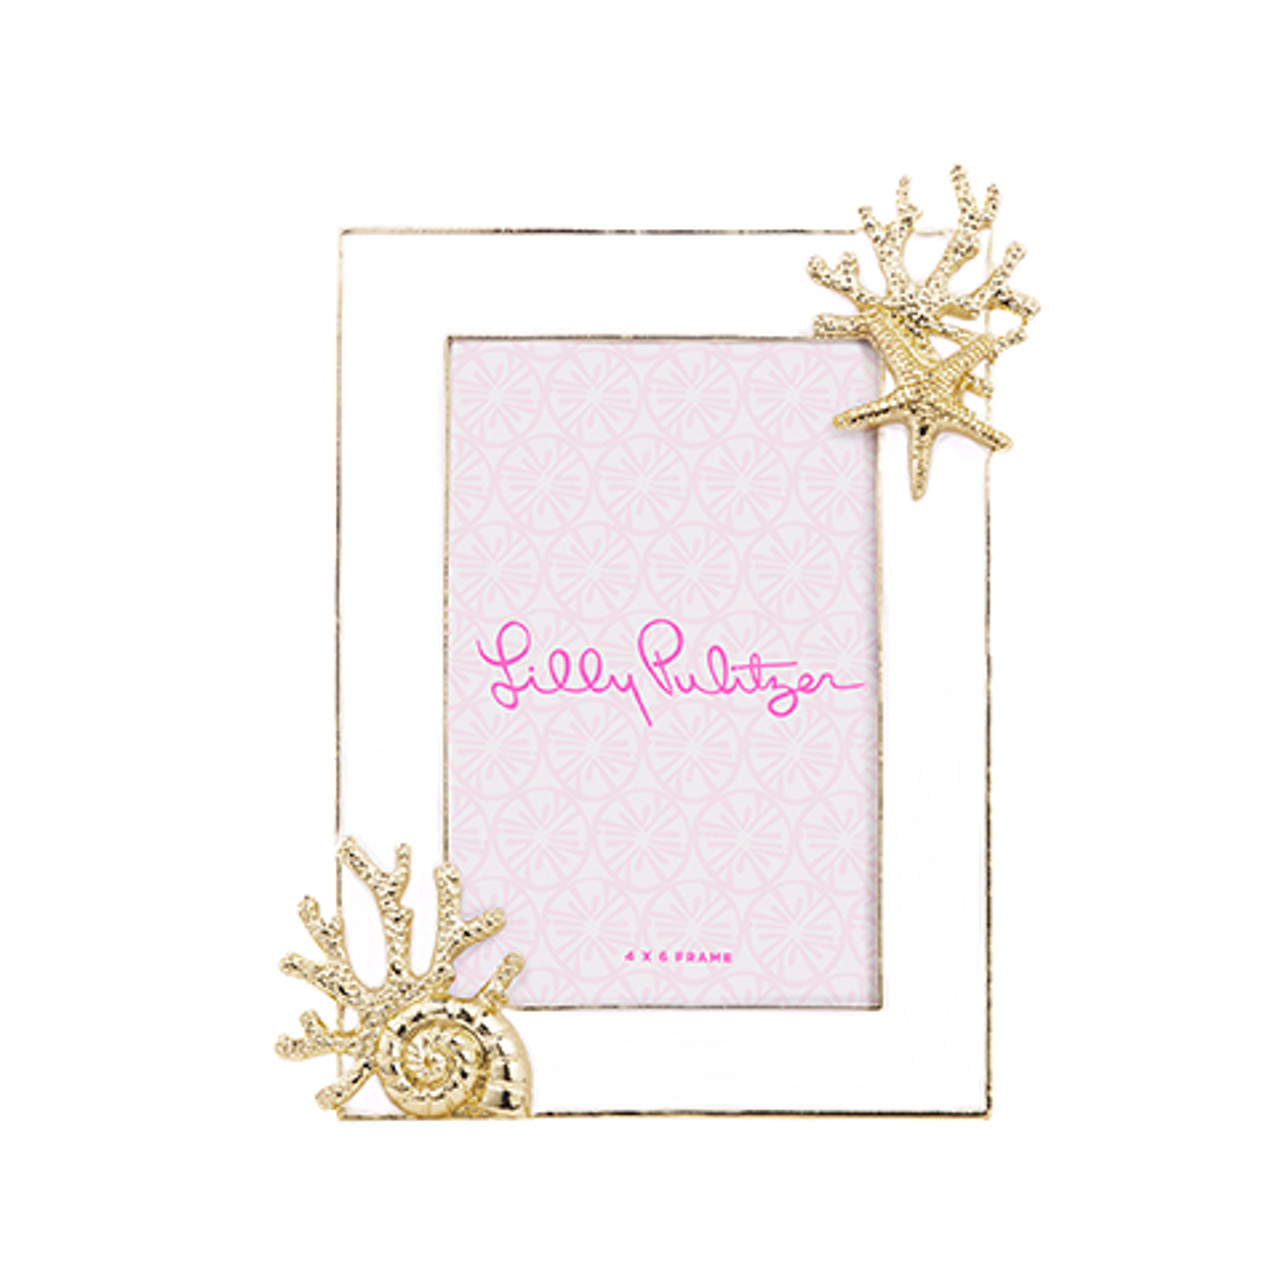 Lilly Pulitzer gold sea coral white photo frame